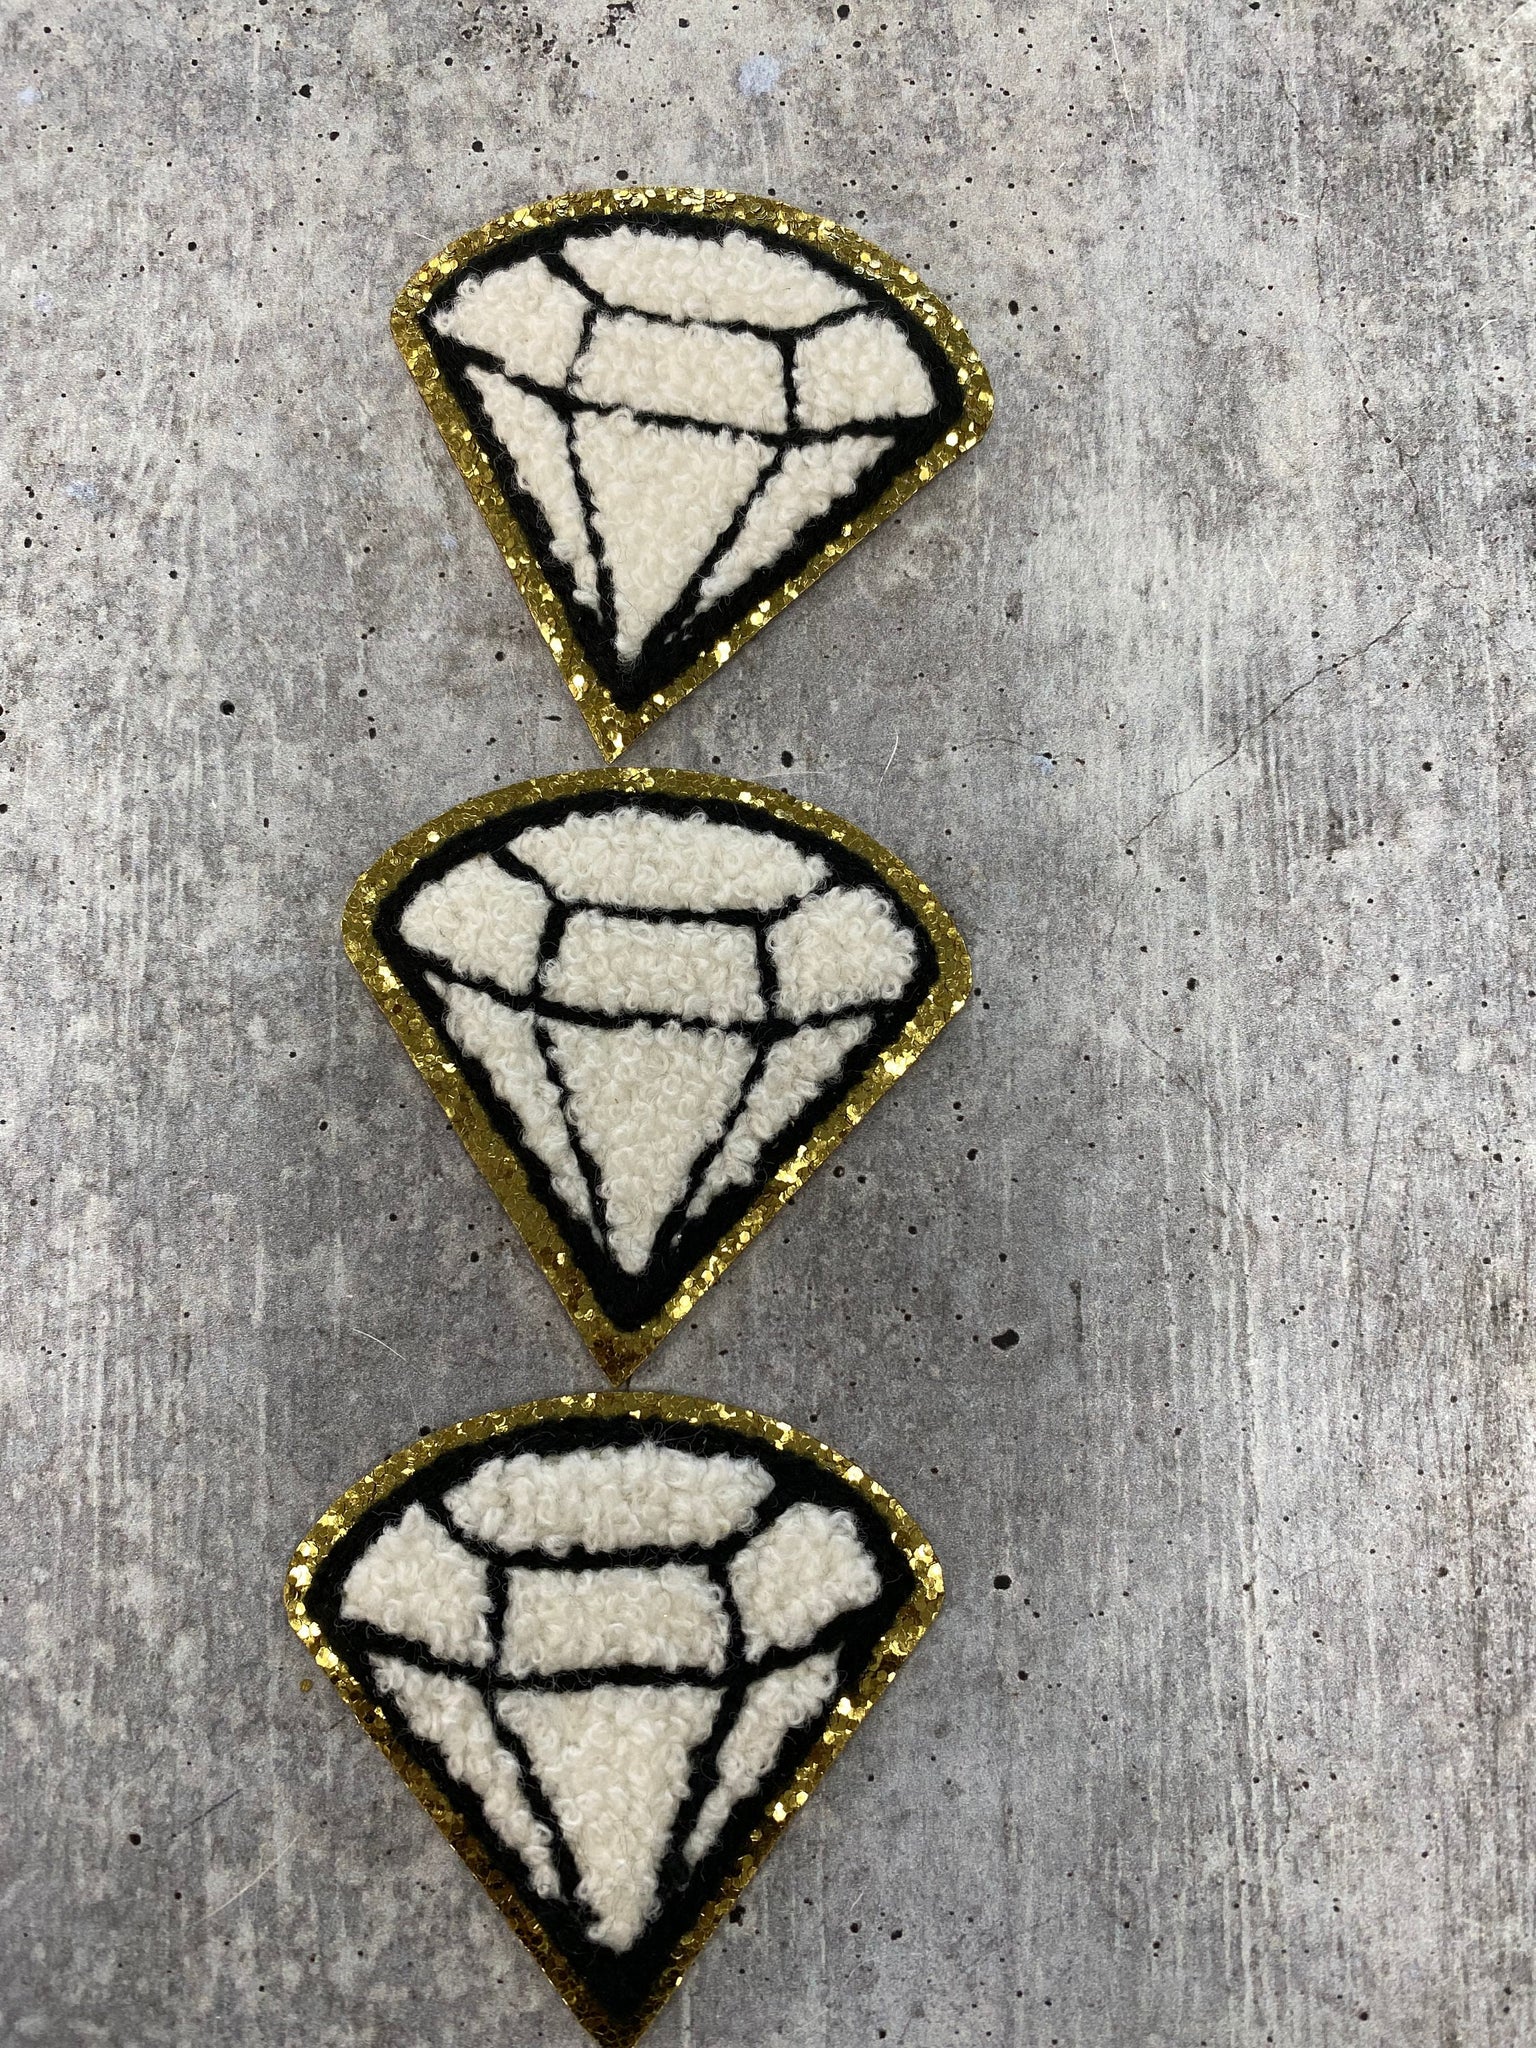 New: White, Chenille 1-pc ‰ÛÏDiamond" w/Gold Glitter, Size 2.5", Love Patch with Iron-on Backing, Fuzzy Applique, Iron-on Patch for Girls